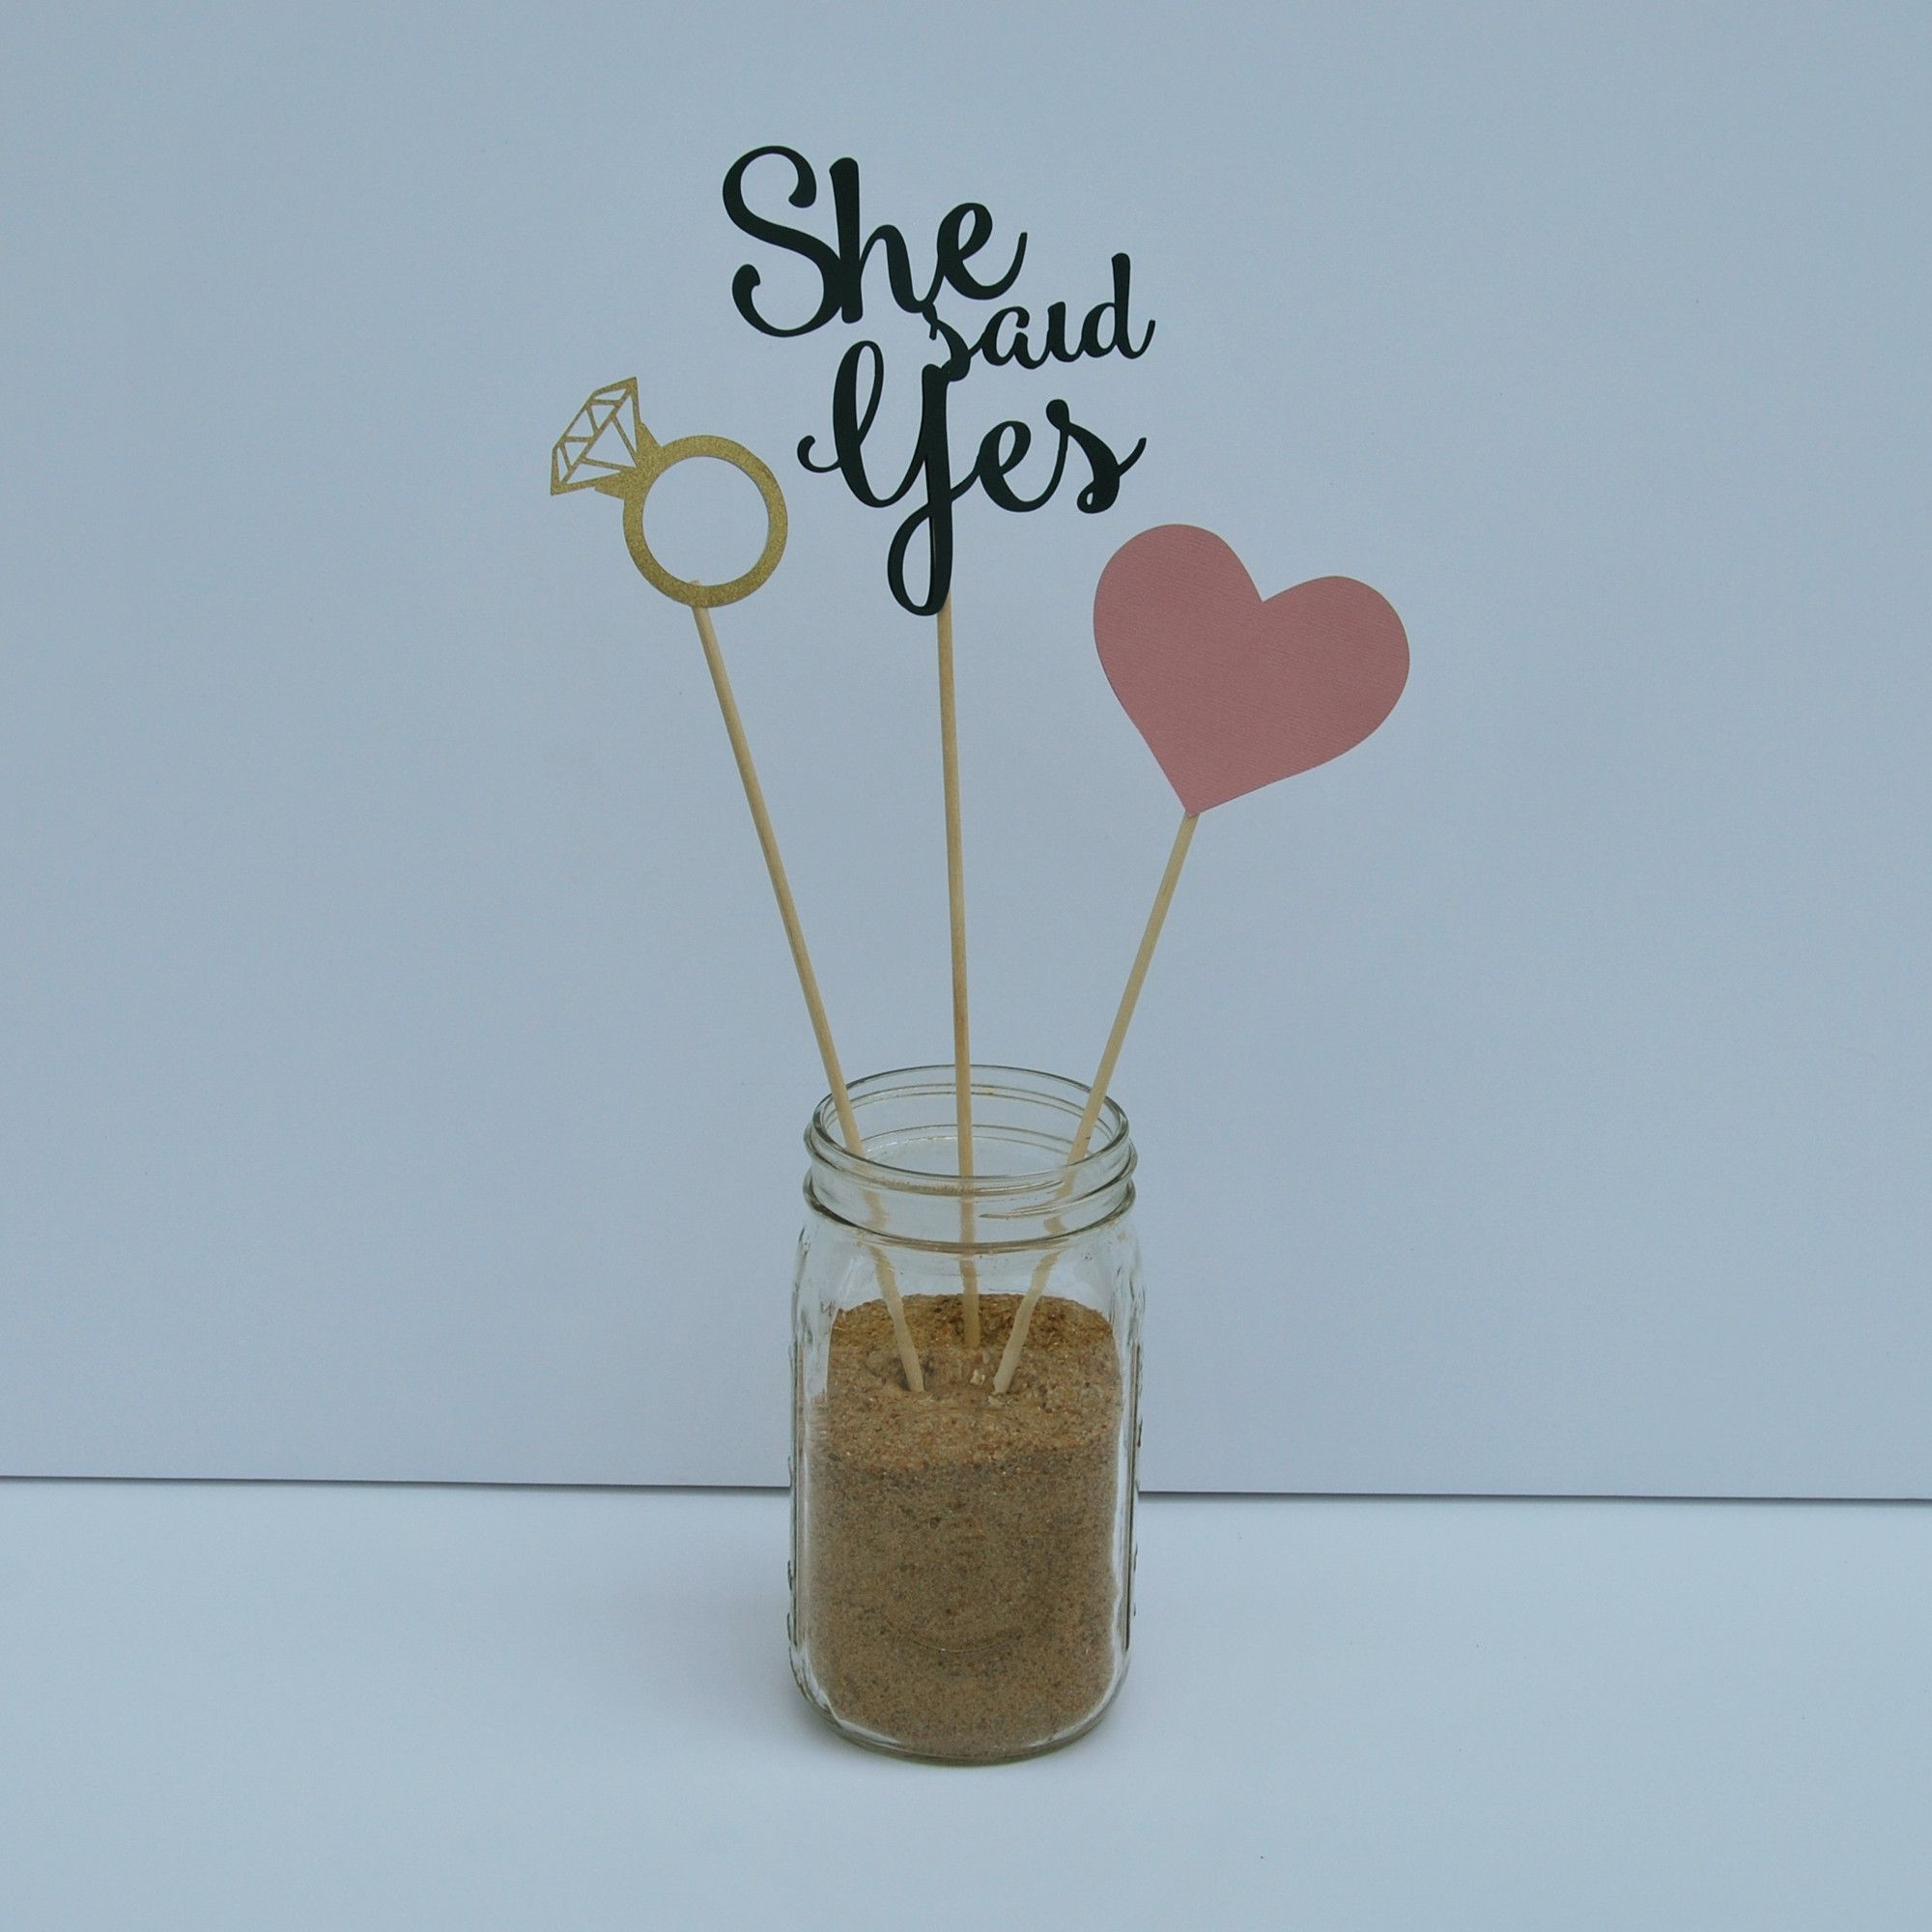 Centerpiece Ideas For Engagement Party
 "She Said Yes" Engagement Party Centerpiece for Pinterest